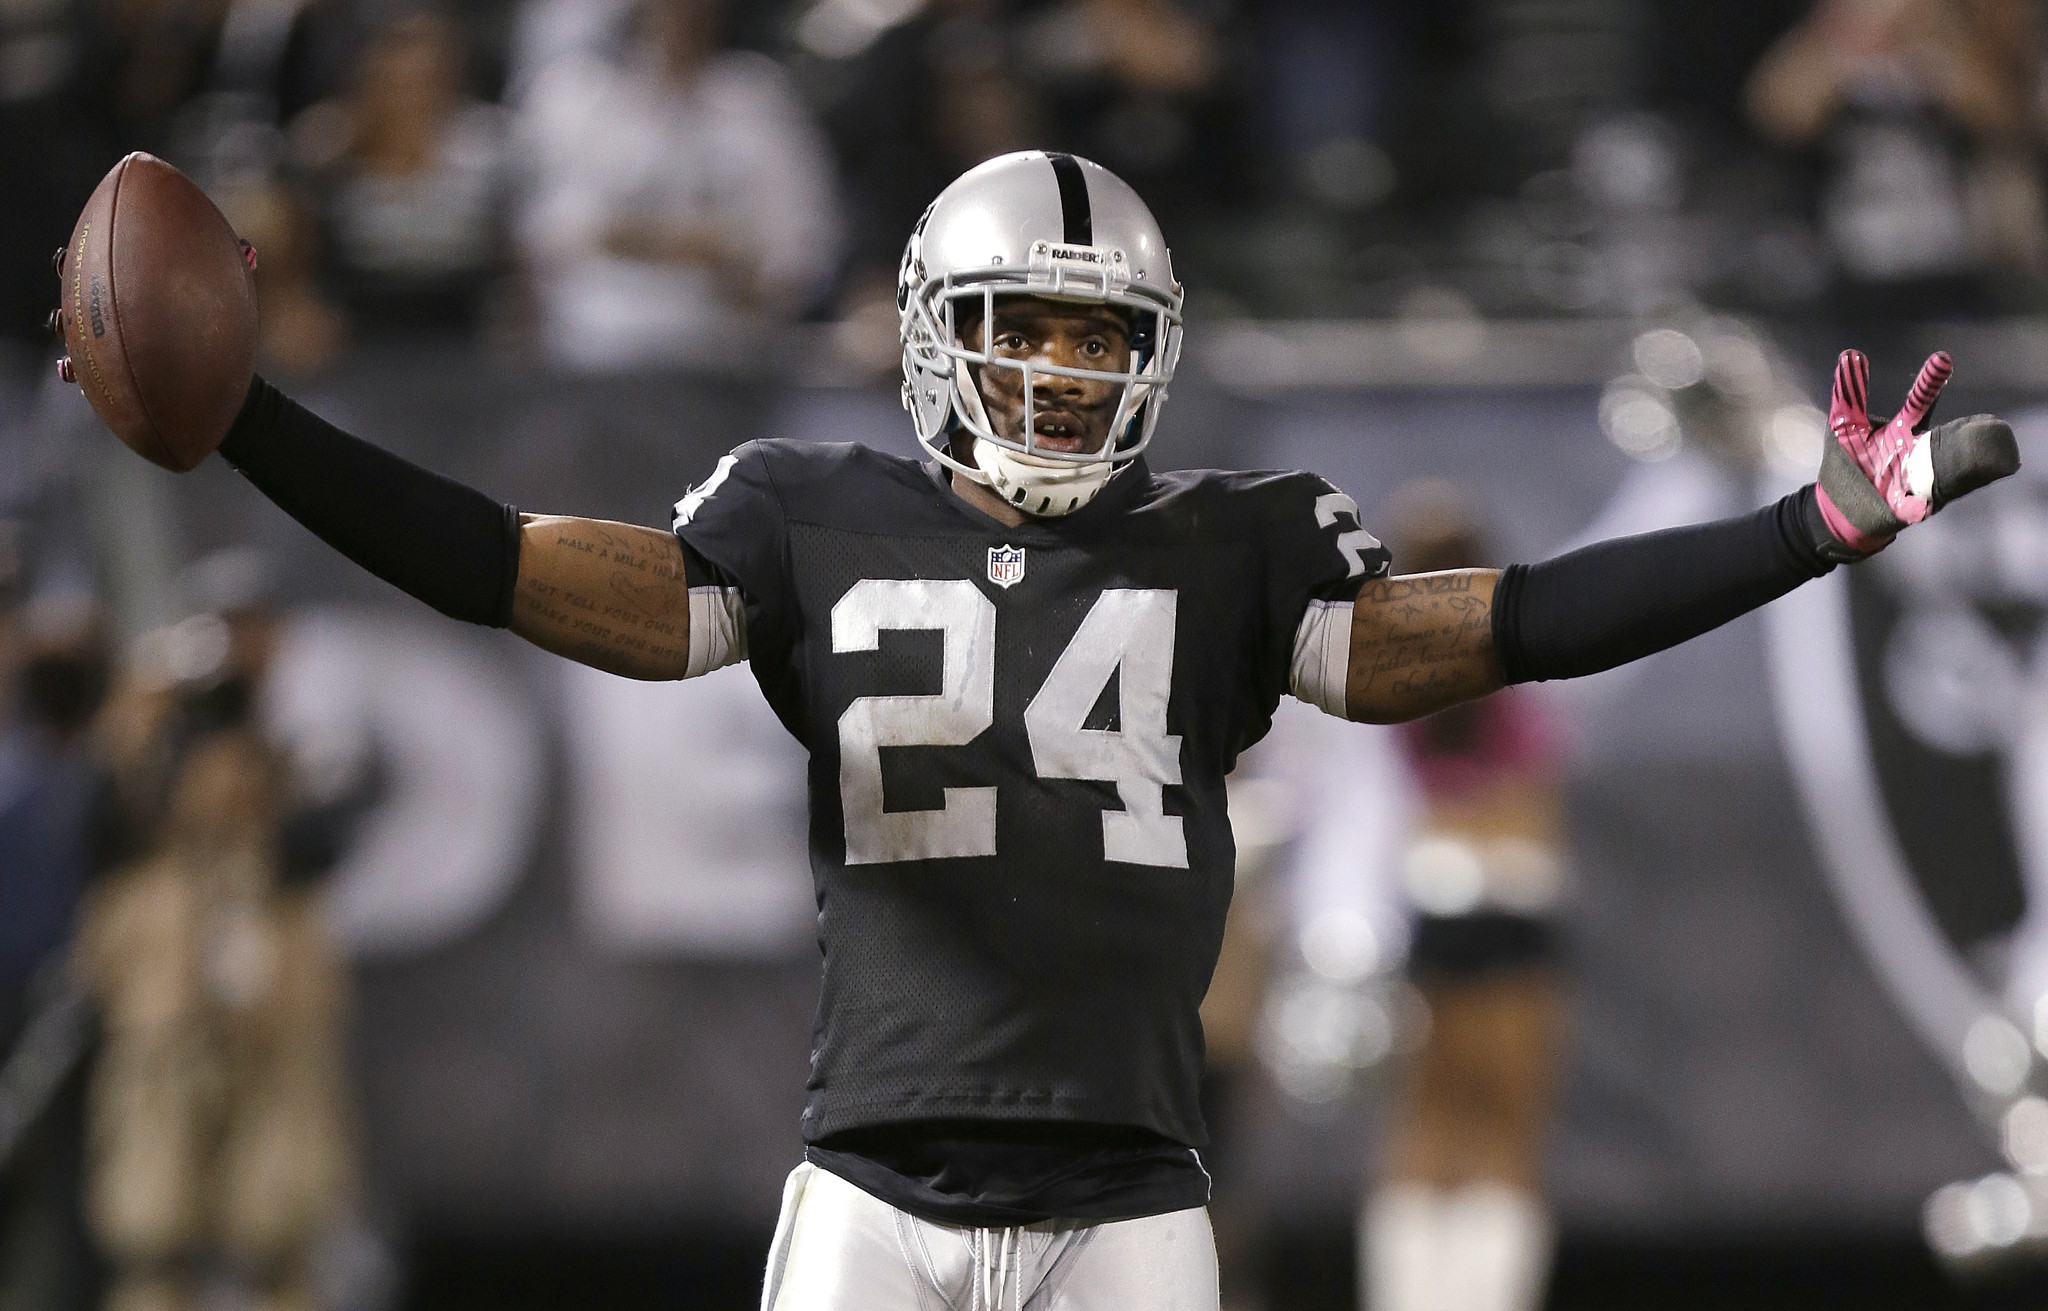 Charles Woodson to retire after 18 seasons - Chicago Tribune2048 x 1311